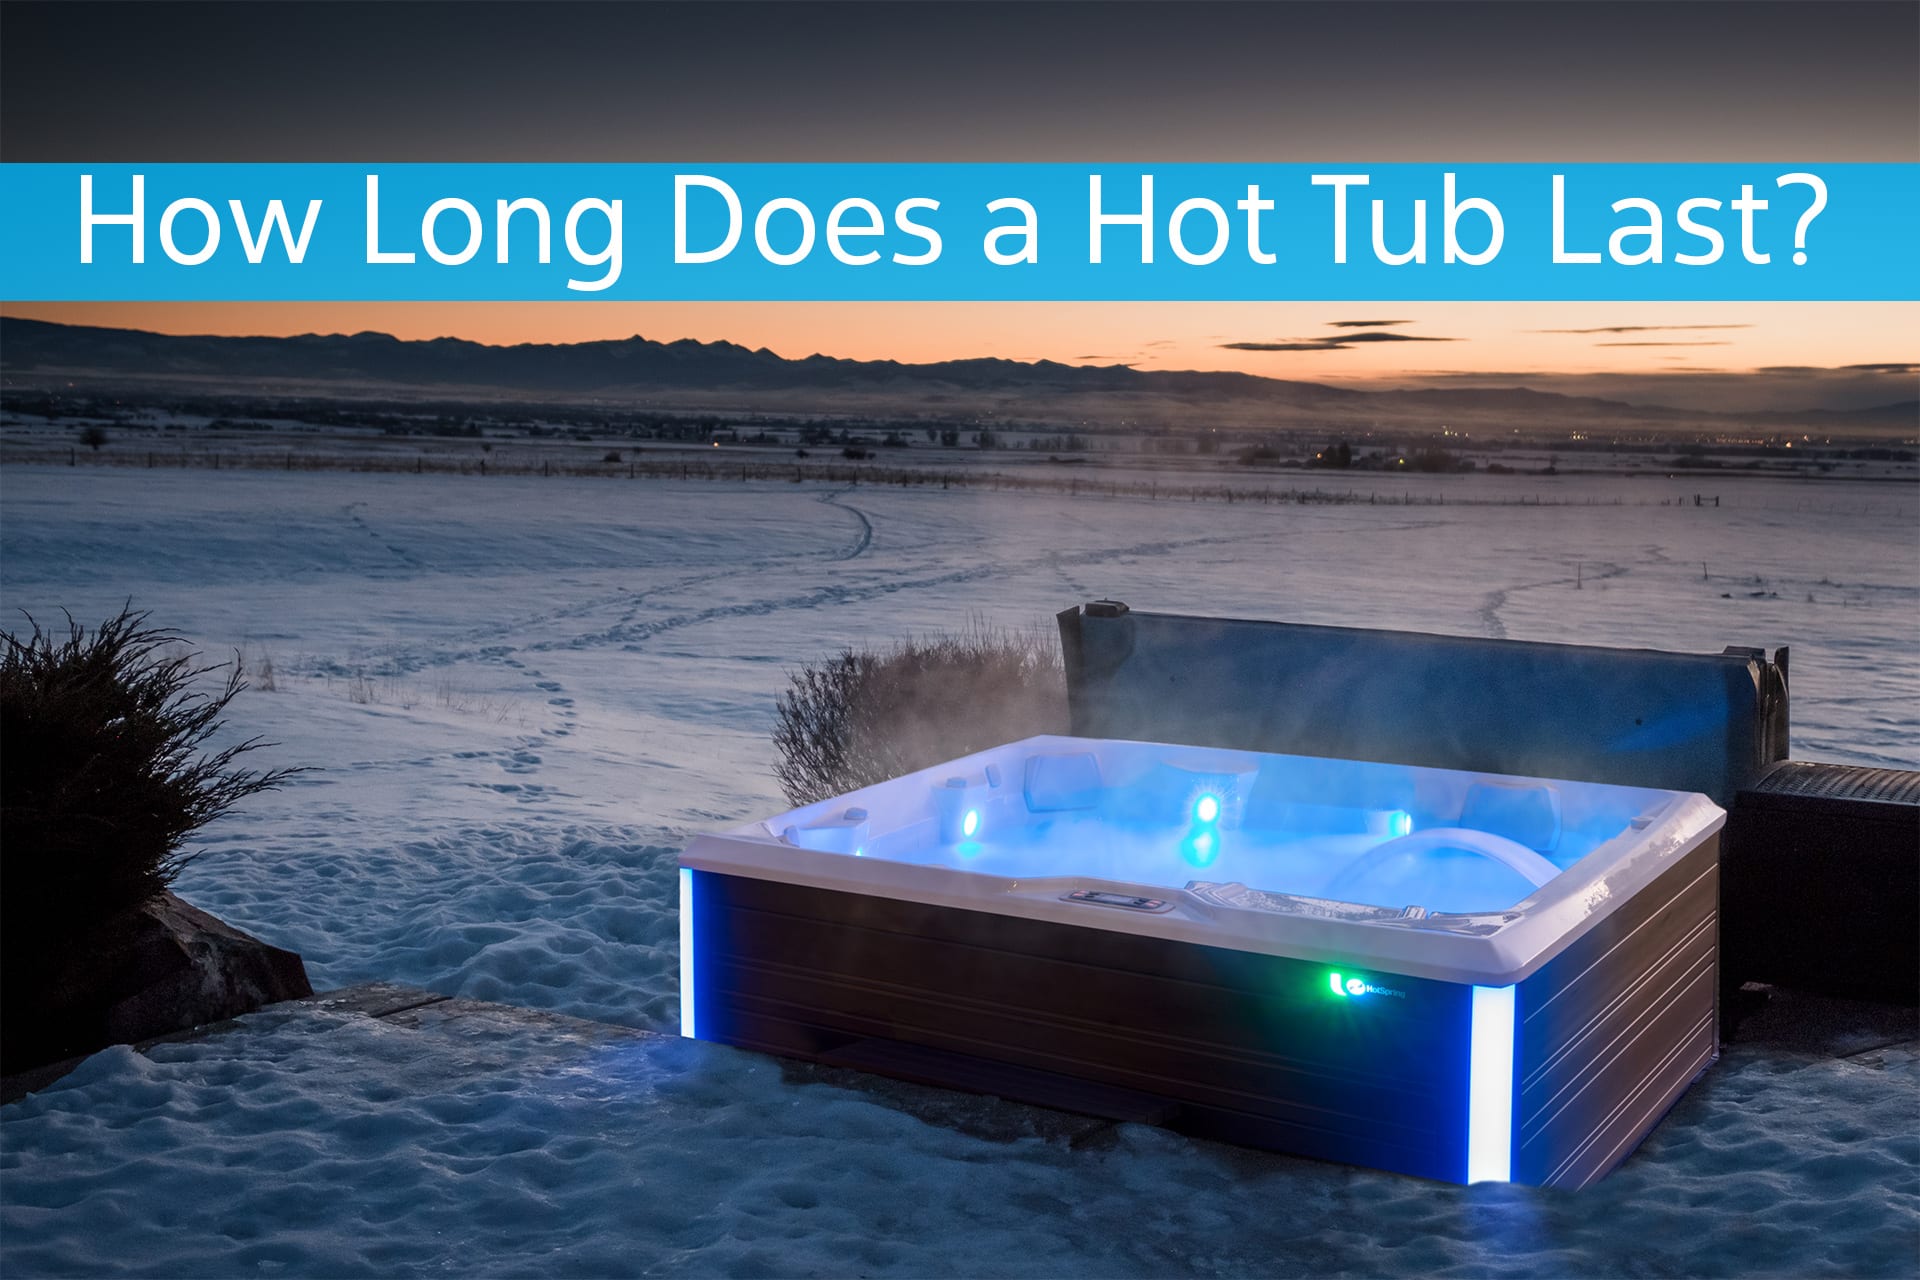 How Long Does a Hot Tub Last?